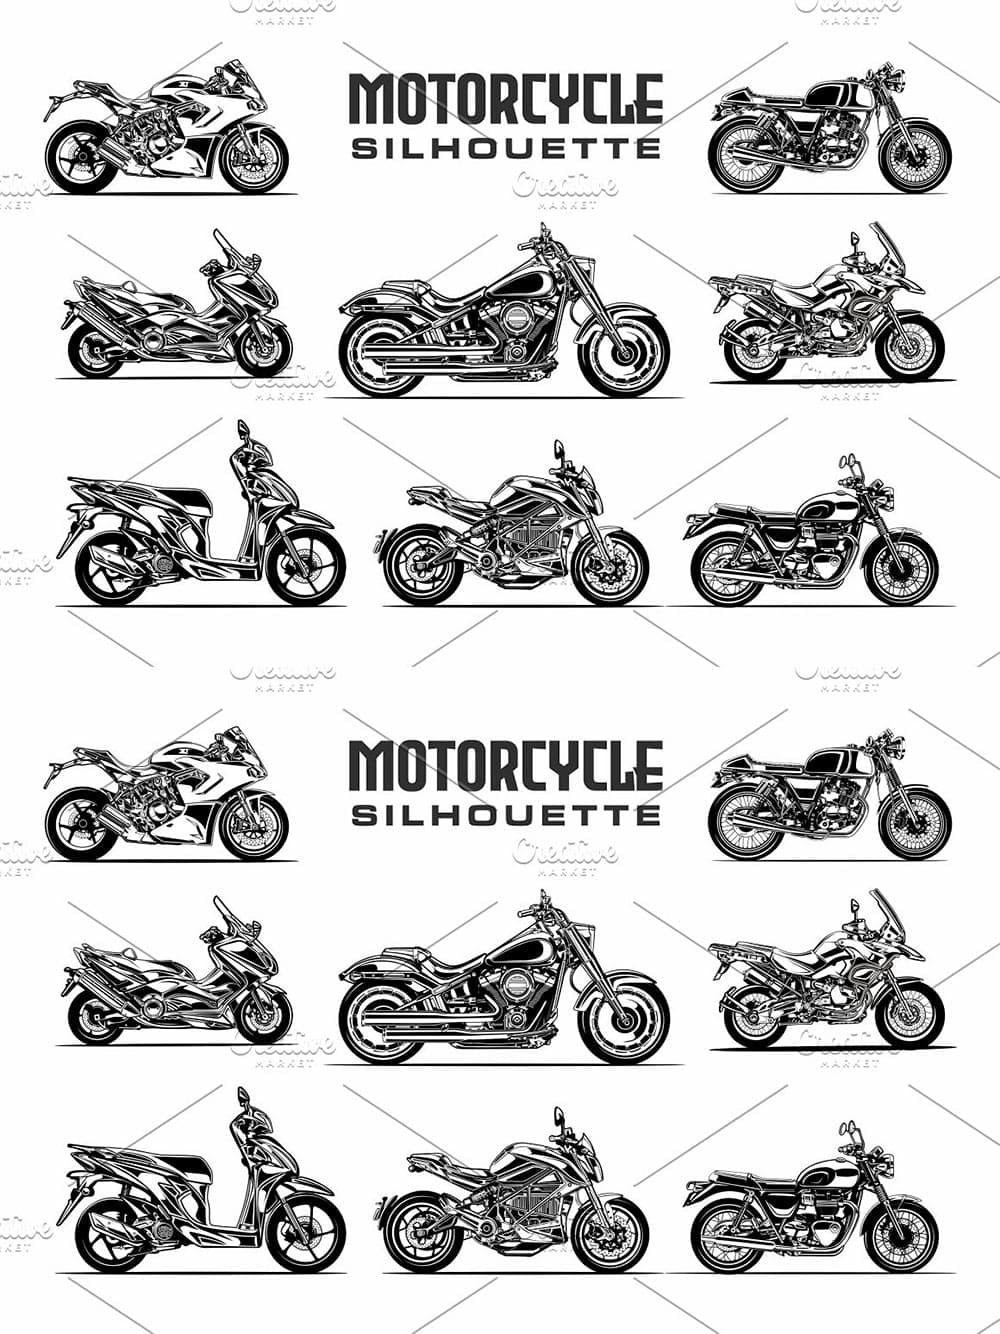 Motorcyle silhouette vector, picture for pinterest.